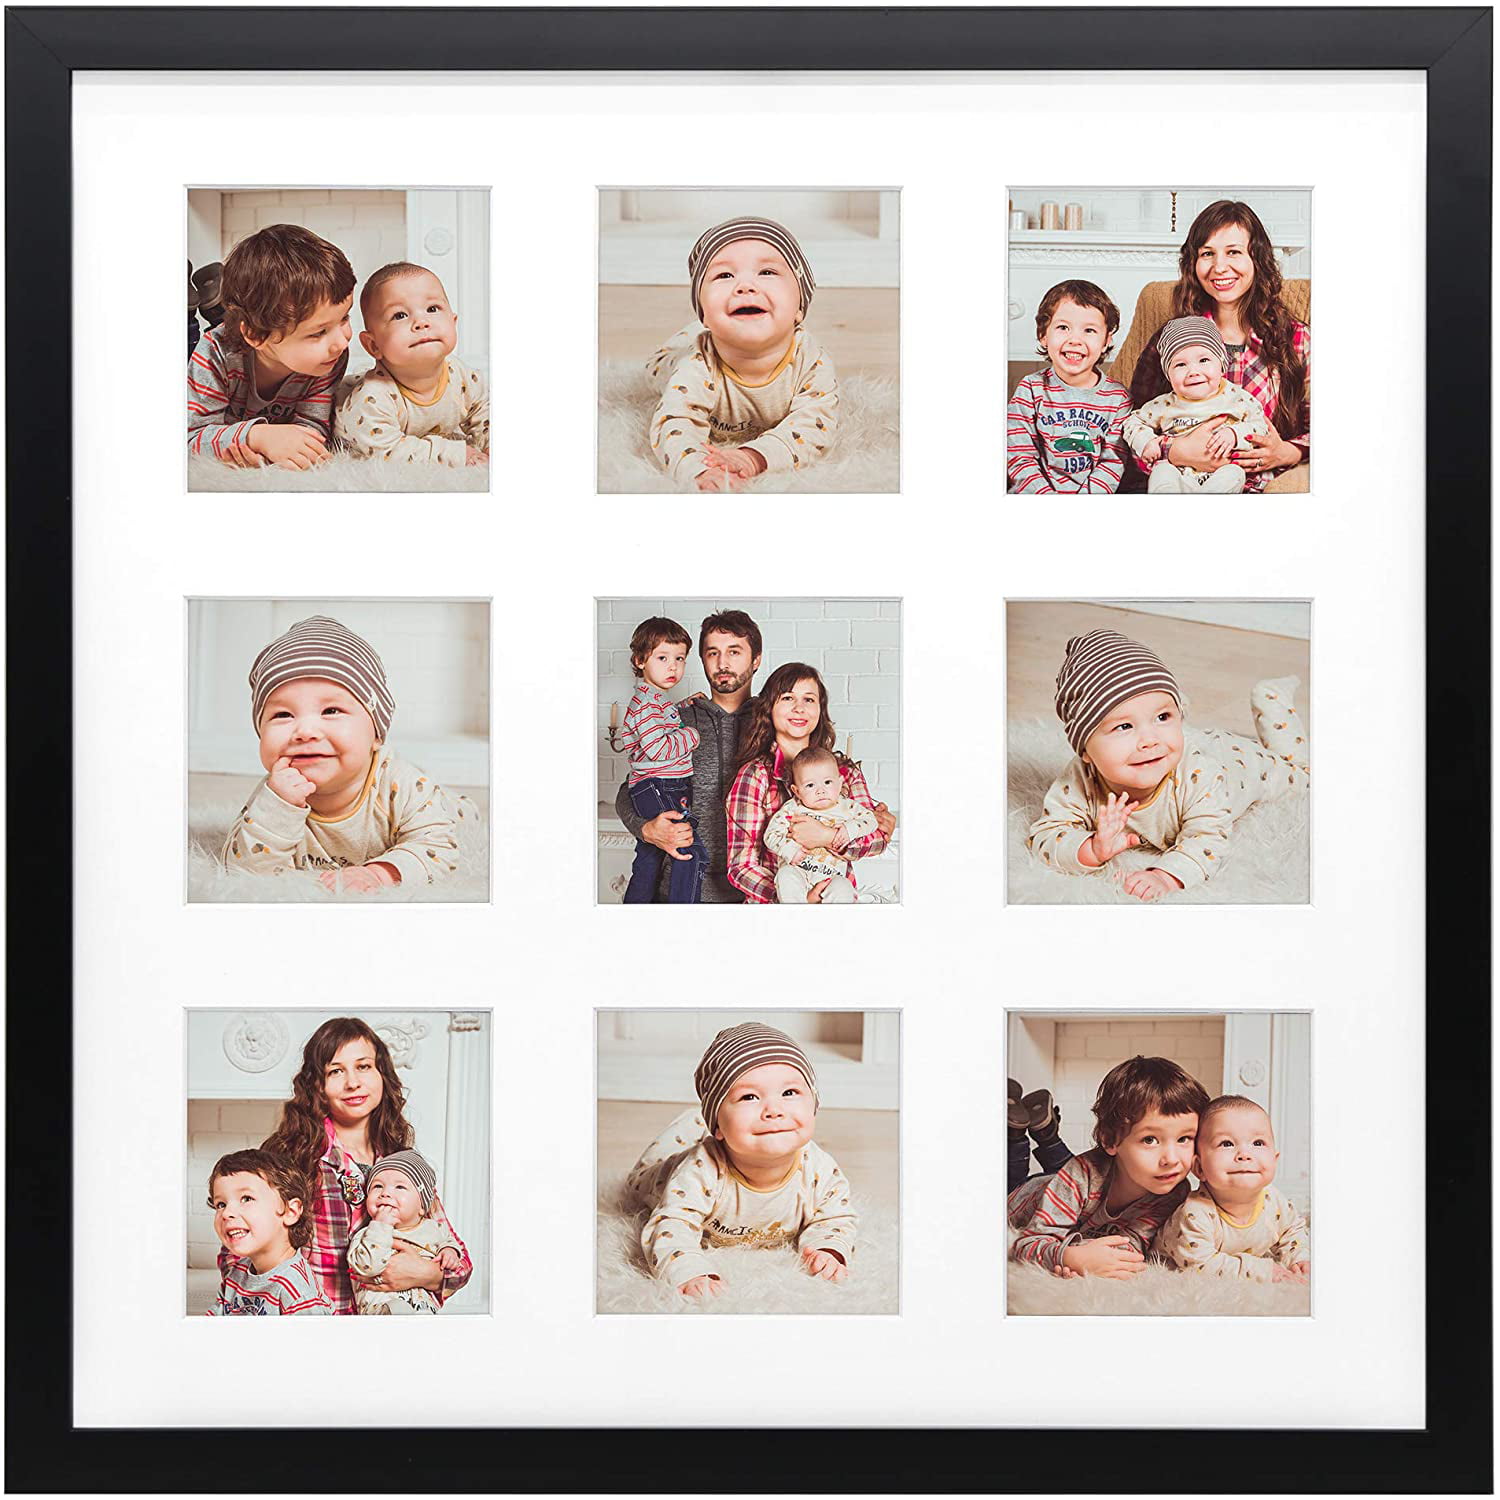 for Smartphone Instagram Pictures Includes a White Mat for 4x4 Photo & Real Glass Golden State Art Wall Decoration 6x6 Black Photo Square Wood Frame